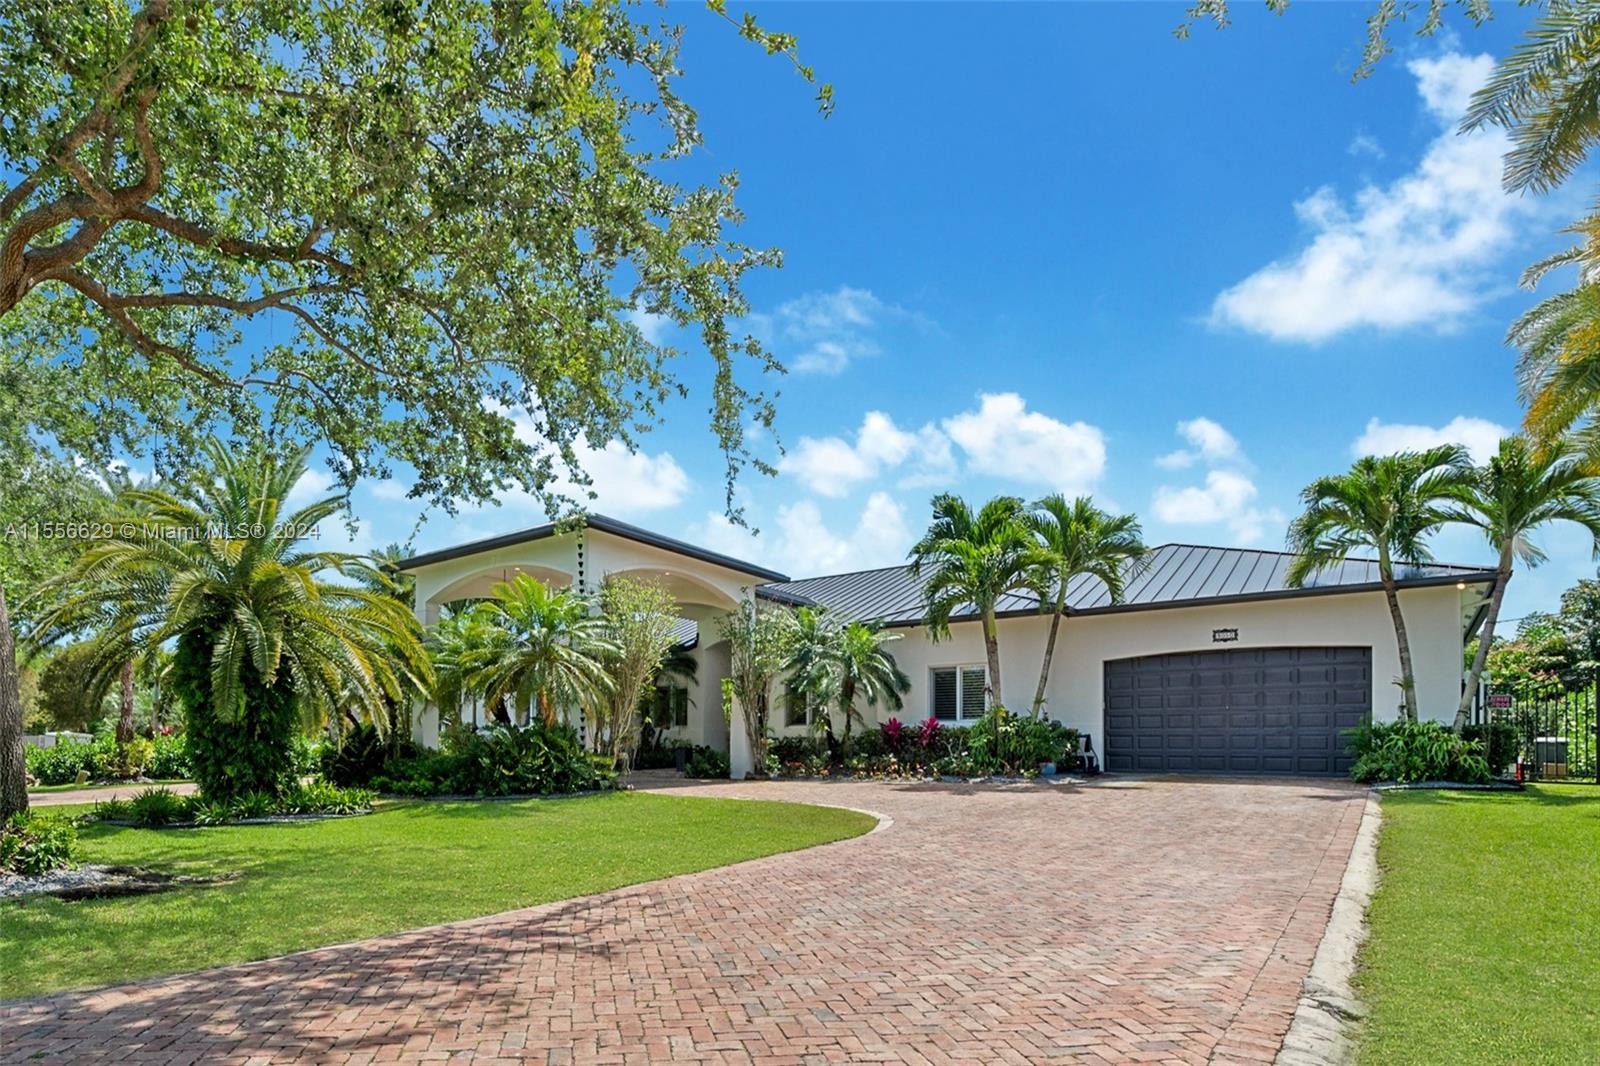 Come discover this captivating 1-story home with 5,319 sf in Palmetto Bay.  Enjoy 5 bedrooms, 1 office, and 5 baths in this modern oasis. Revel in marble floors, a lavish master suite, and a gourmet kitchen. Outdoors, find a fully-equipped gazebo with an outdoor kitchen, custom made coral rock firepit, and pristine pool, perfect for an entertaining lifestyle. Updated in 2021 with a new roof, A/C, and freshly painted exterior. In addition this home includes plantation shutters, impact windows & California closets throughout. Located on a quiet desirable street, near top private schools such as Palmer Trinity and Westminster Christian, and beautiful parks, this home offers a perfect blend of luxury and convenience. Your dream Palmetto Bay lifestyle awaits!